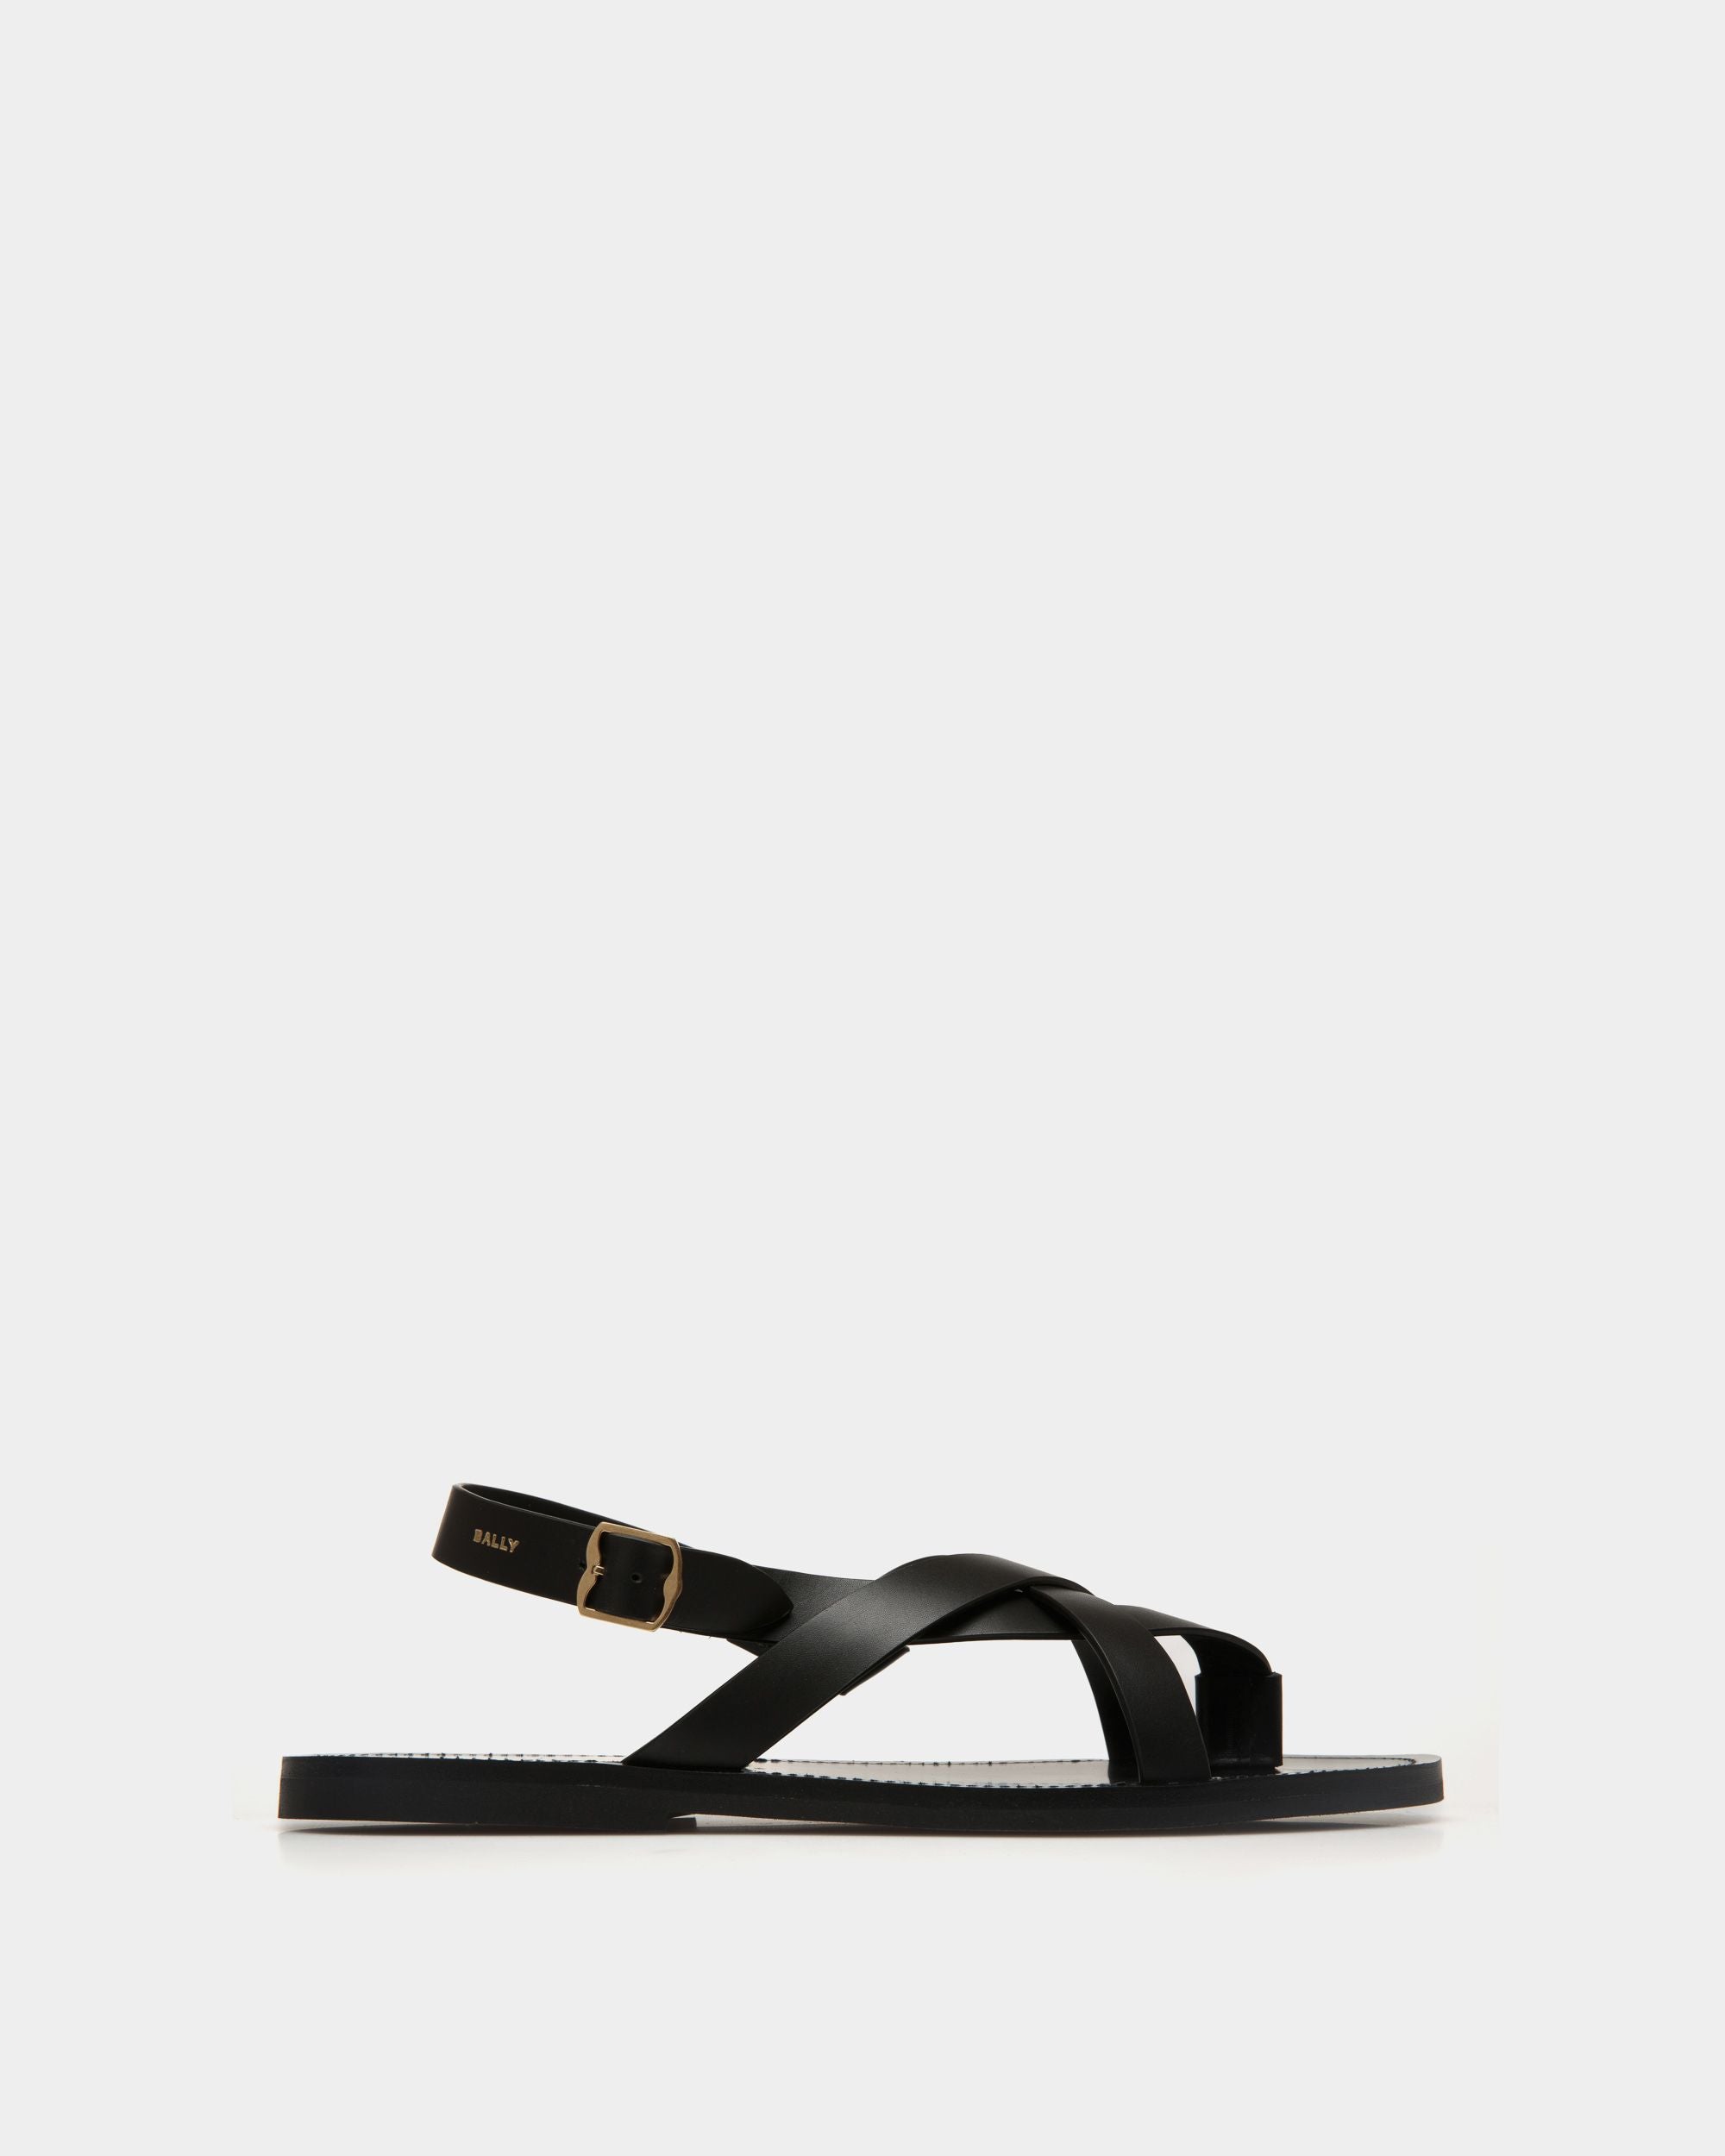 Chateau | Men's Sandal in Black Leather | Bally | Still Life Side